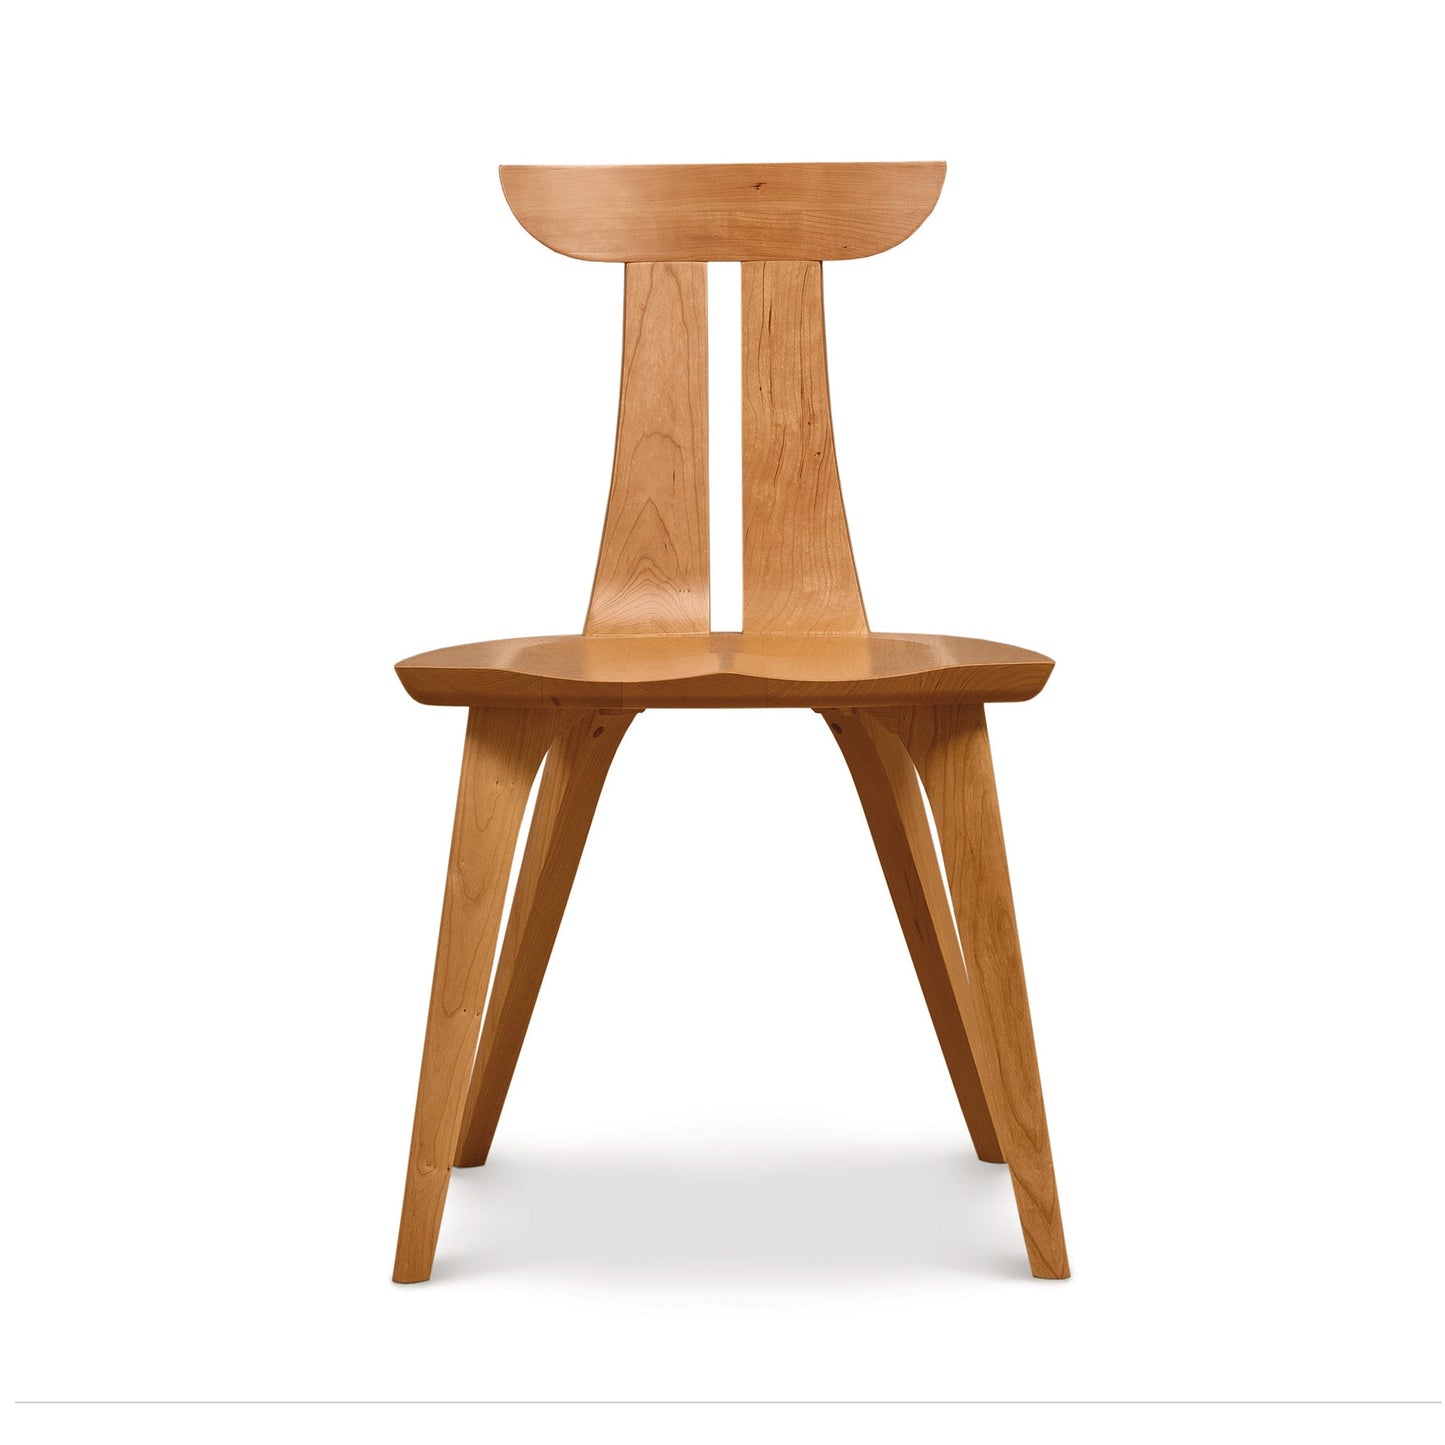 A wooden chair on a white background.